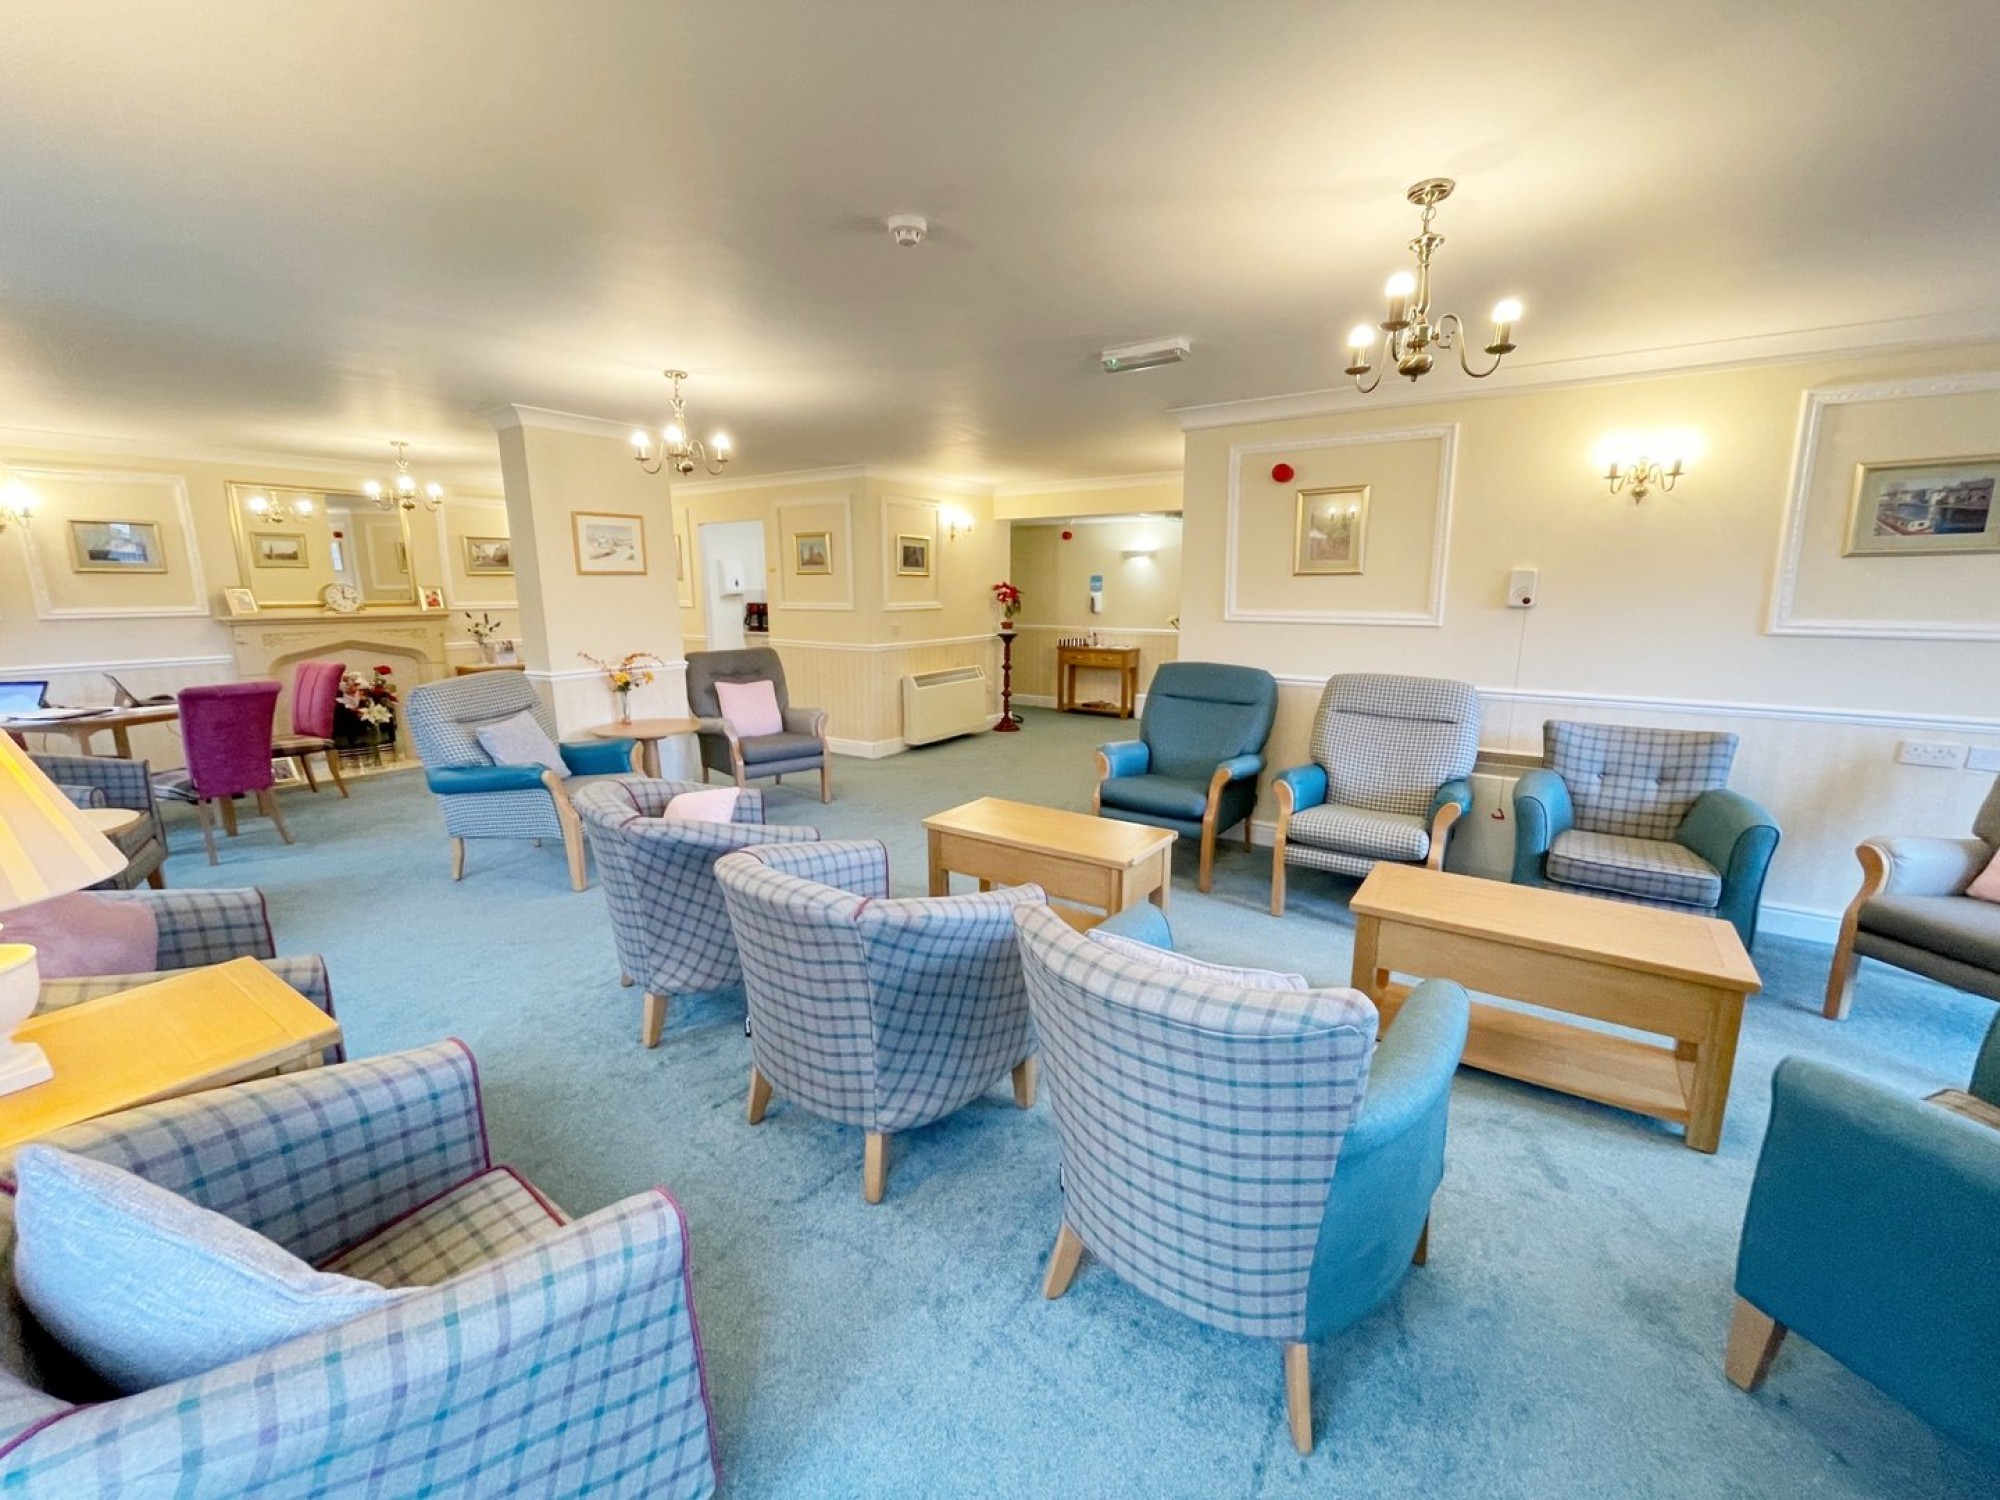 Images for Gwenllian Morgan Court, Brecon, Powys